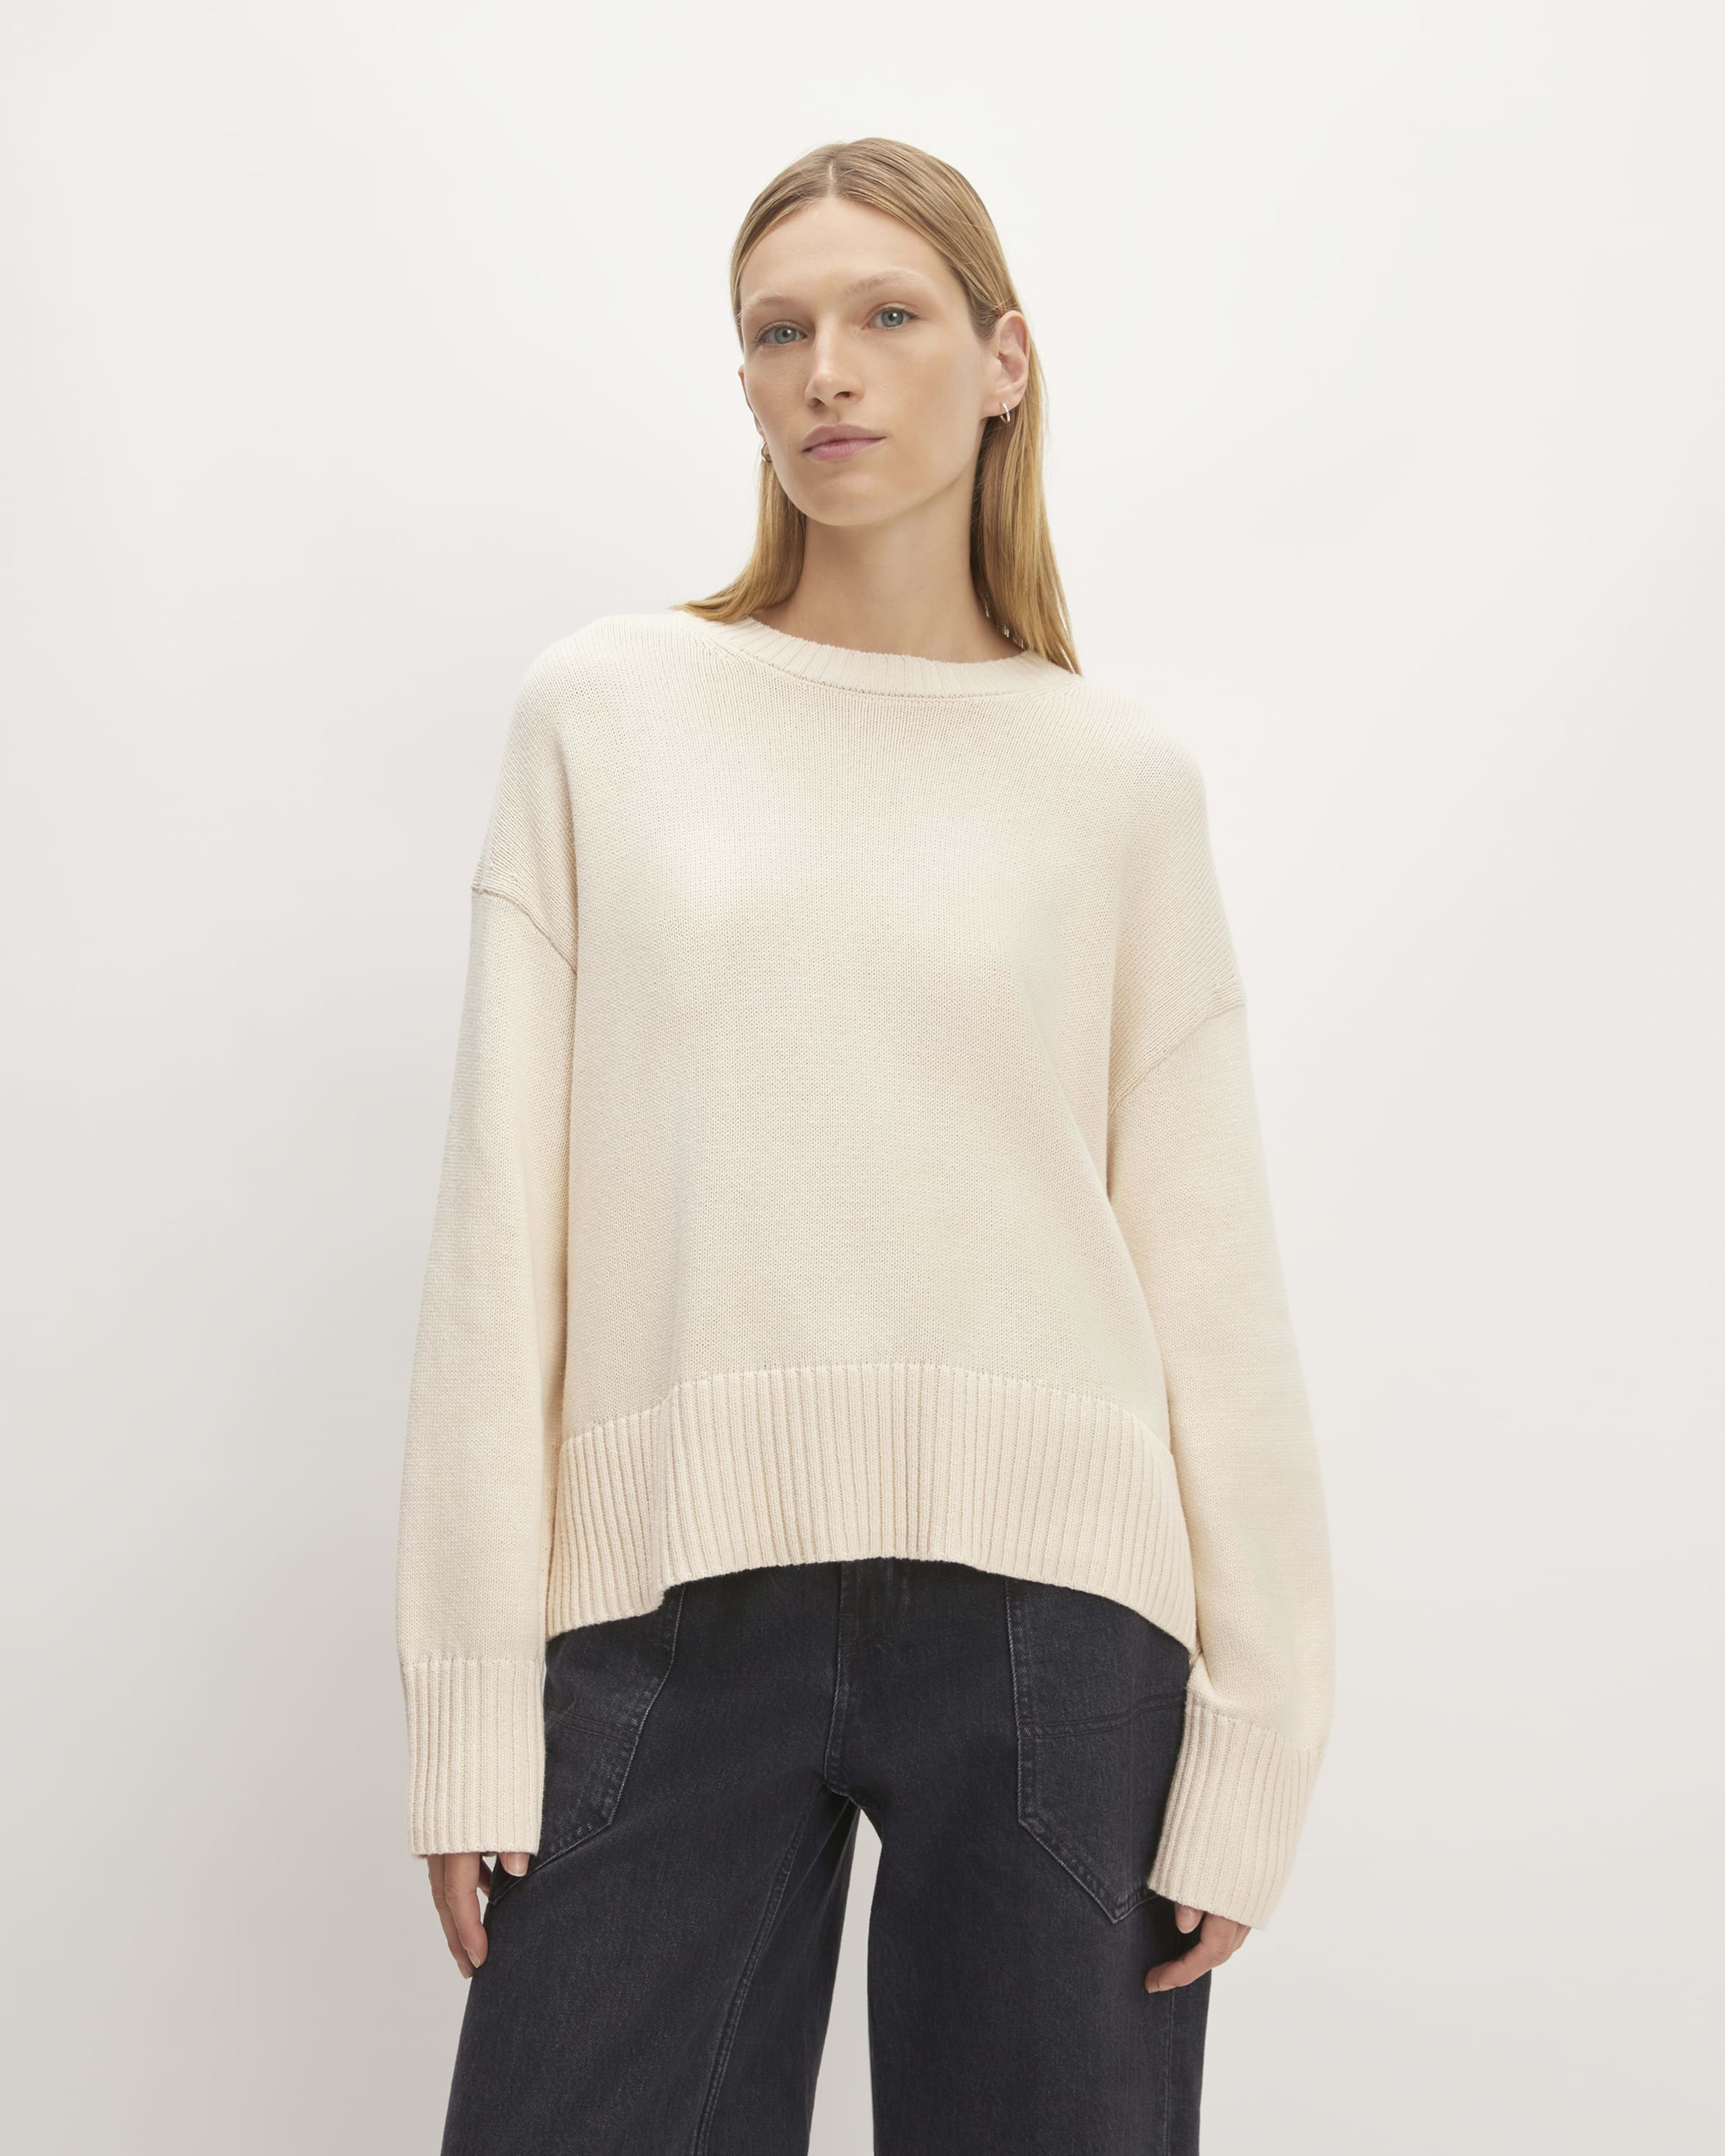 H&M Sweaters for Women Under $100, Fashion